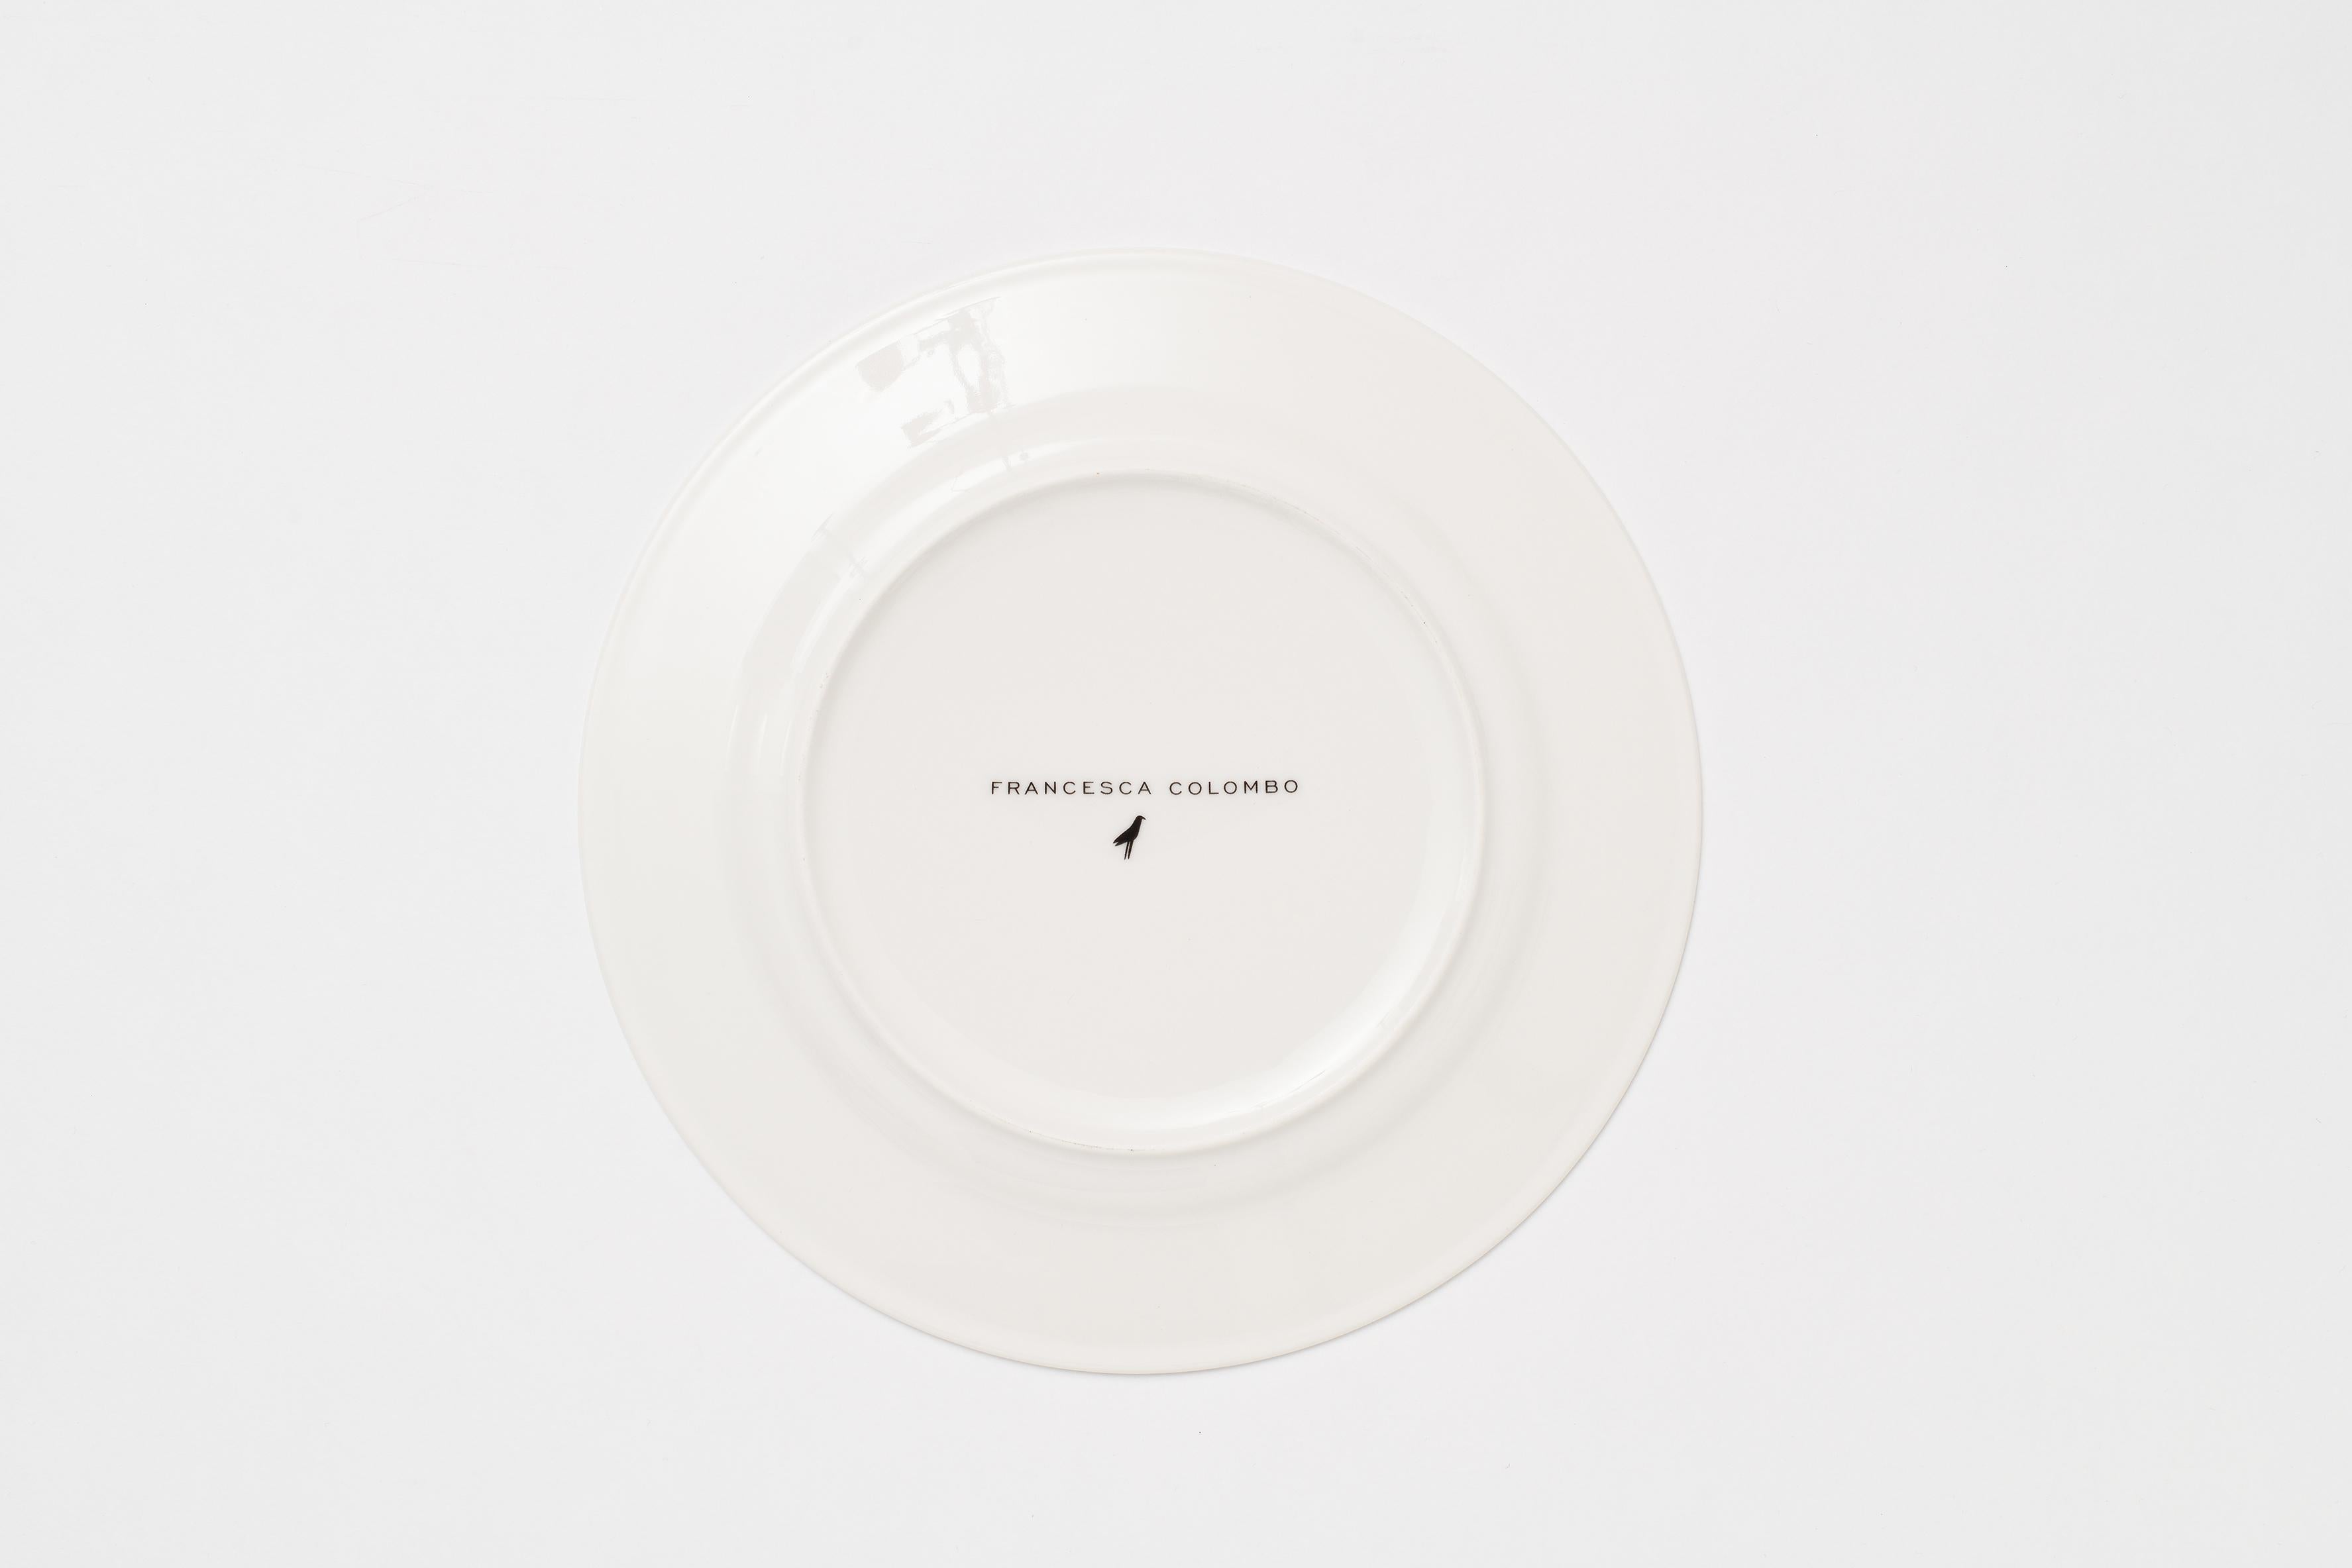 A bison, a typical animal of the woods is gently painted on this dinner plate, with soft black tones and it is surrounded by a delicate and intriguing mix of wild flowers and leaves reinterpreted in a fresh and poetic color way. These porcelain